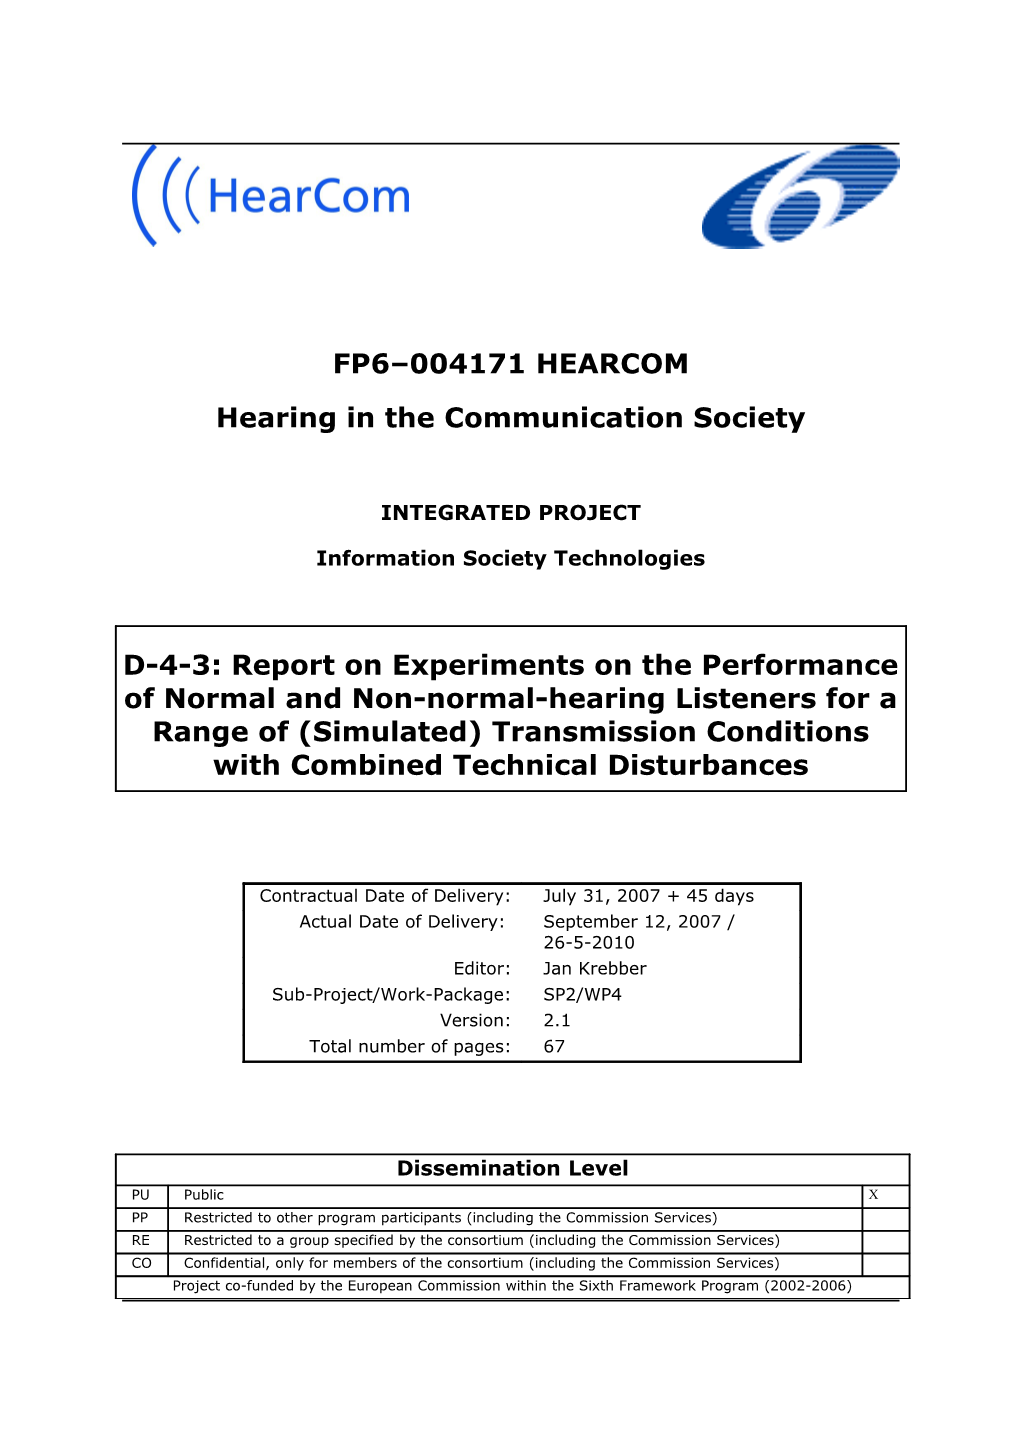 Hearing in the Communication Society